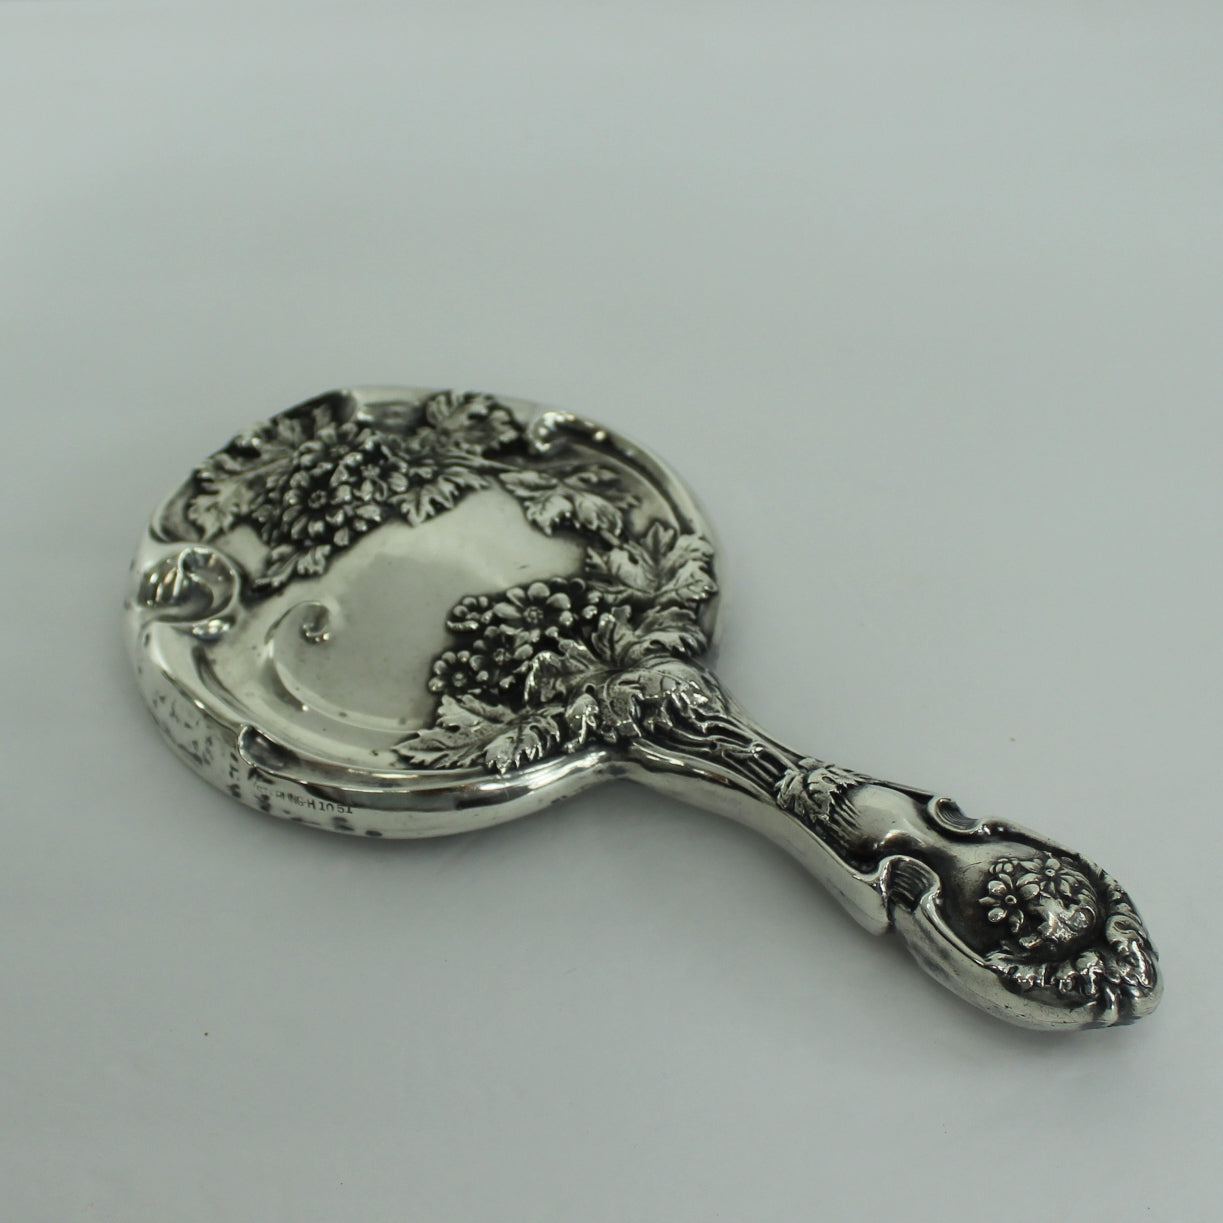 Antique Sterling Silver Hand Mirror Victorian Vanity Floral Art Nouveau Repousse beautiful rococo pattern